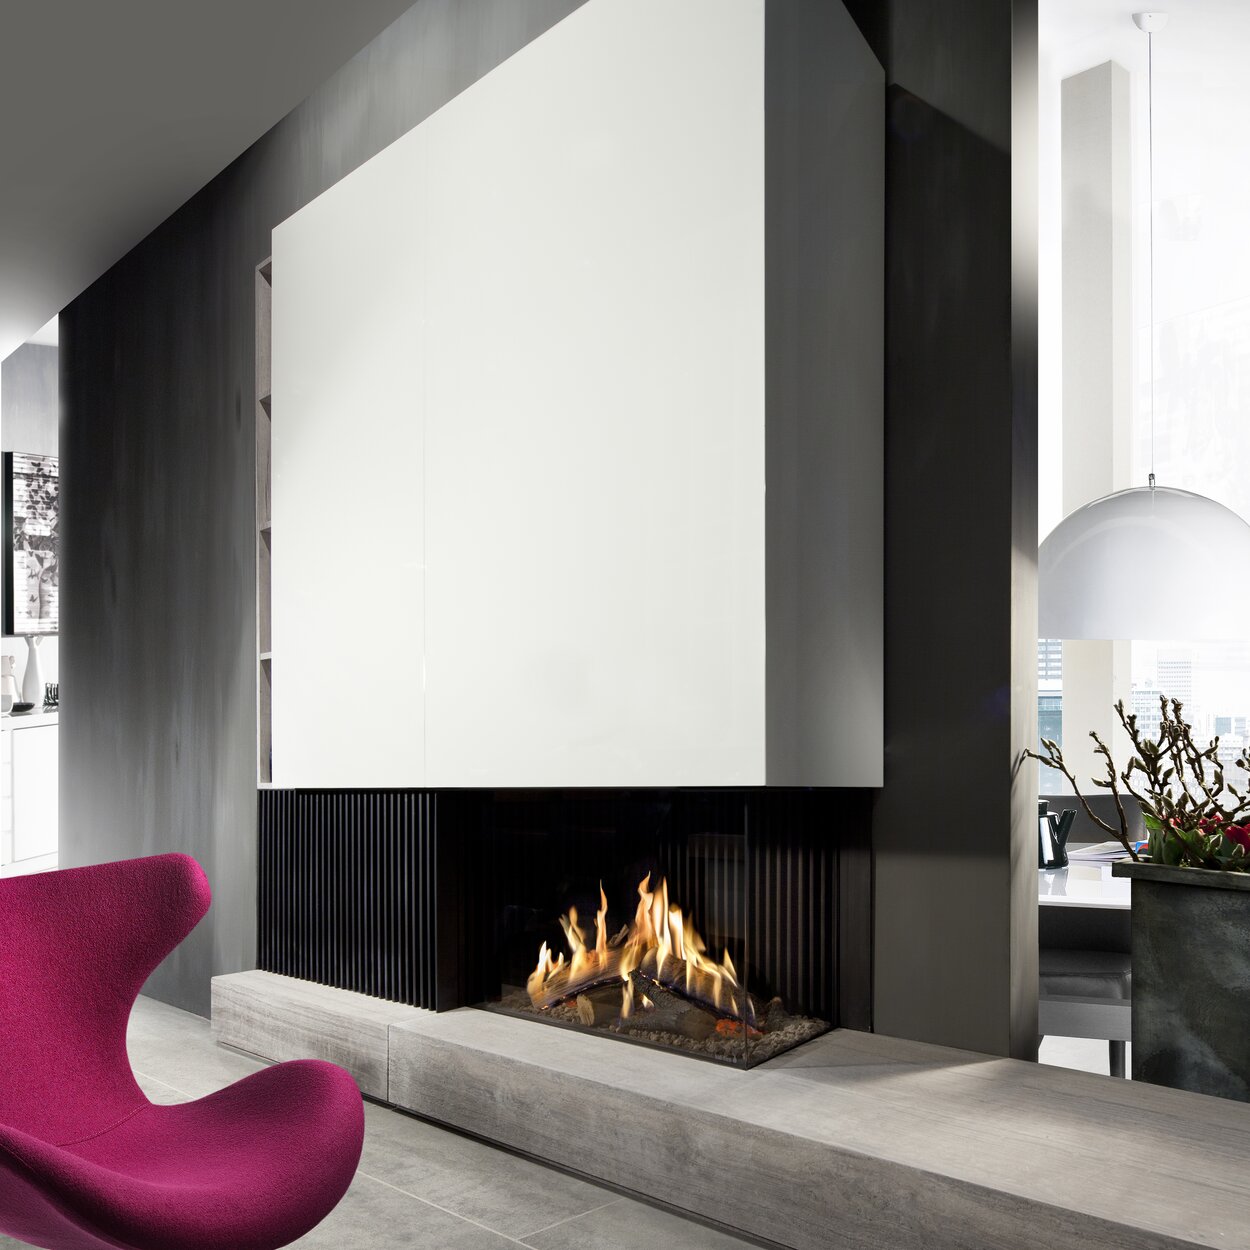 Gas fireplace GP80/55C 2-sided glazed in concrete element installed in modern living room